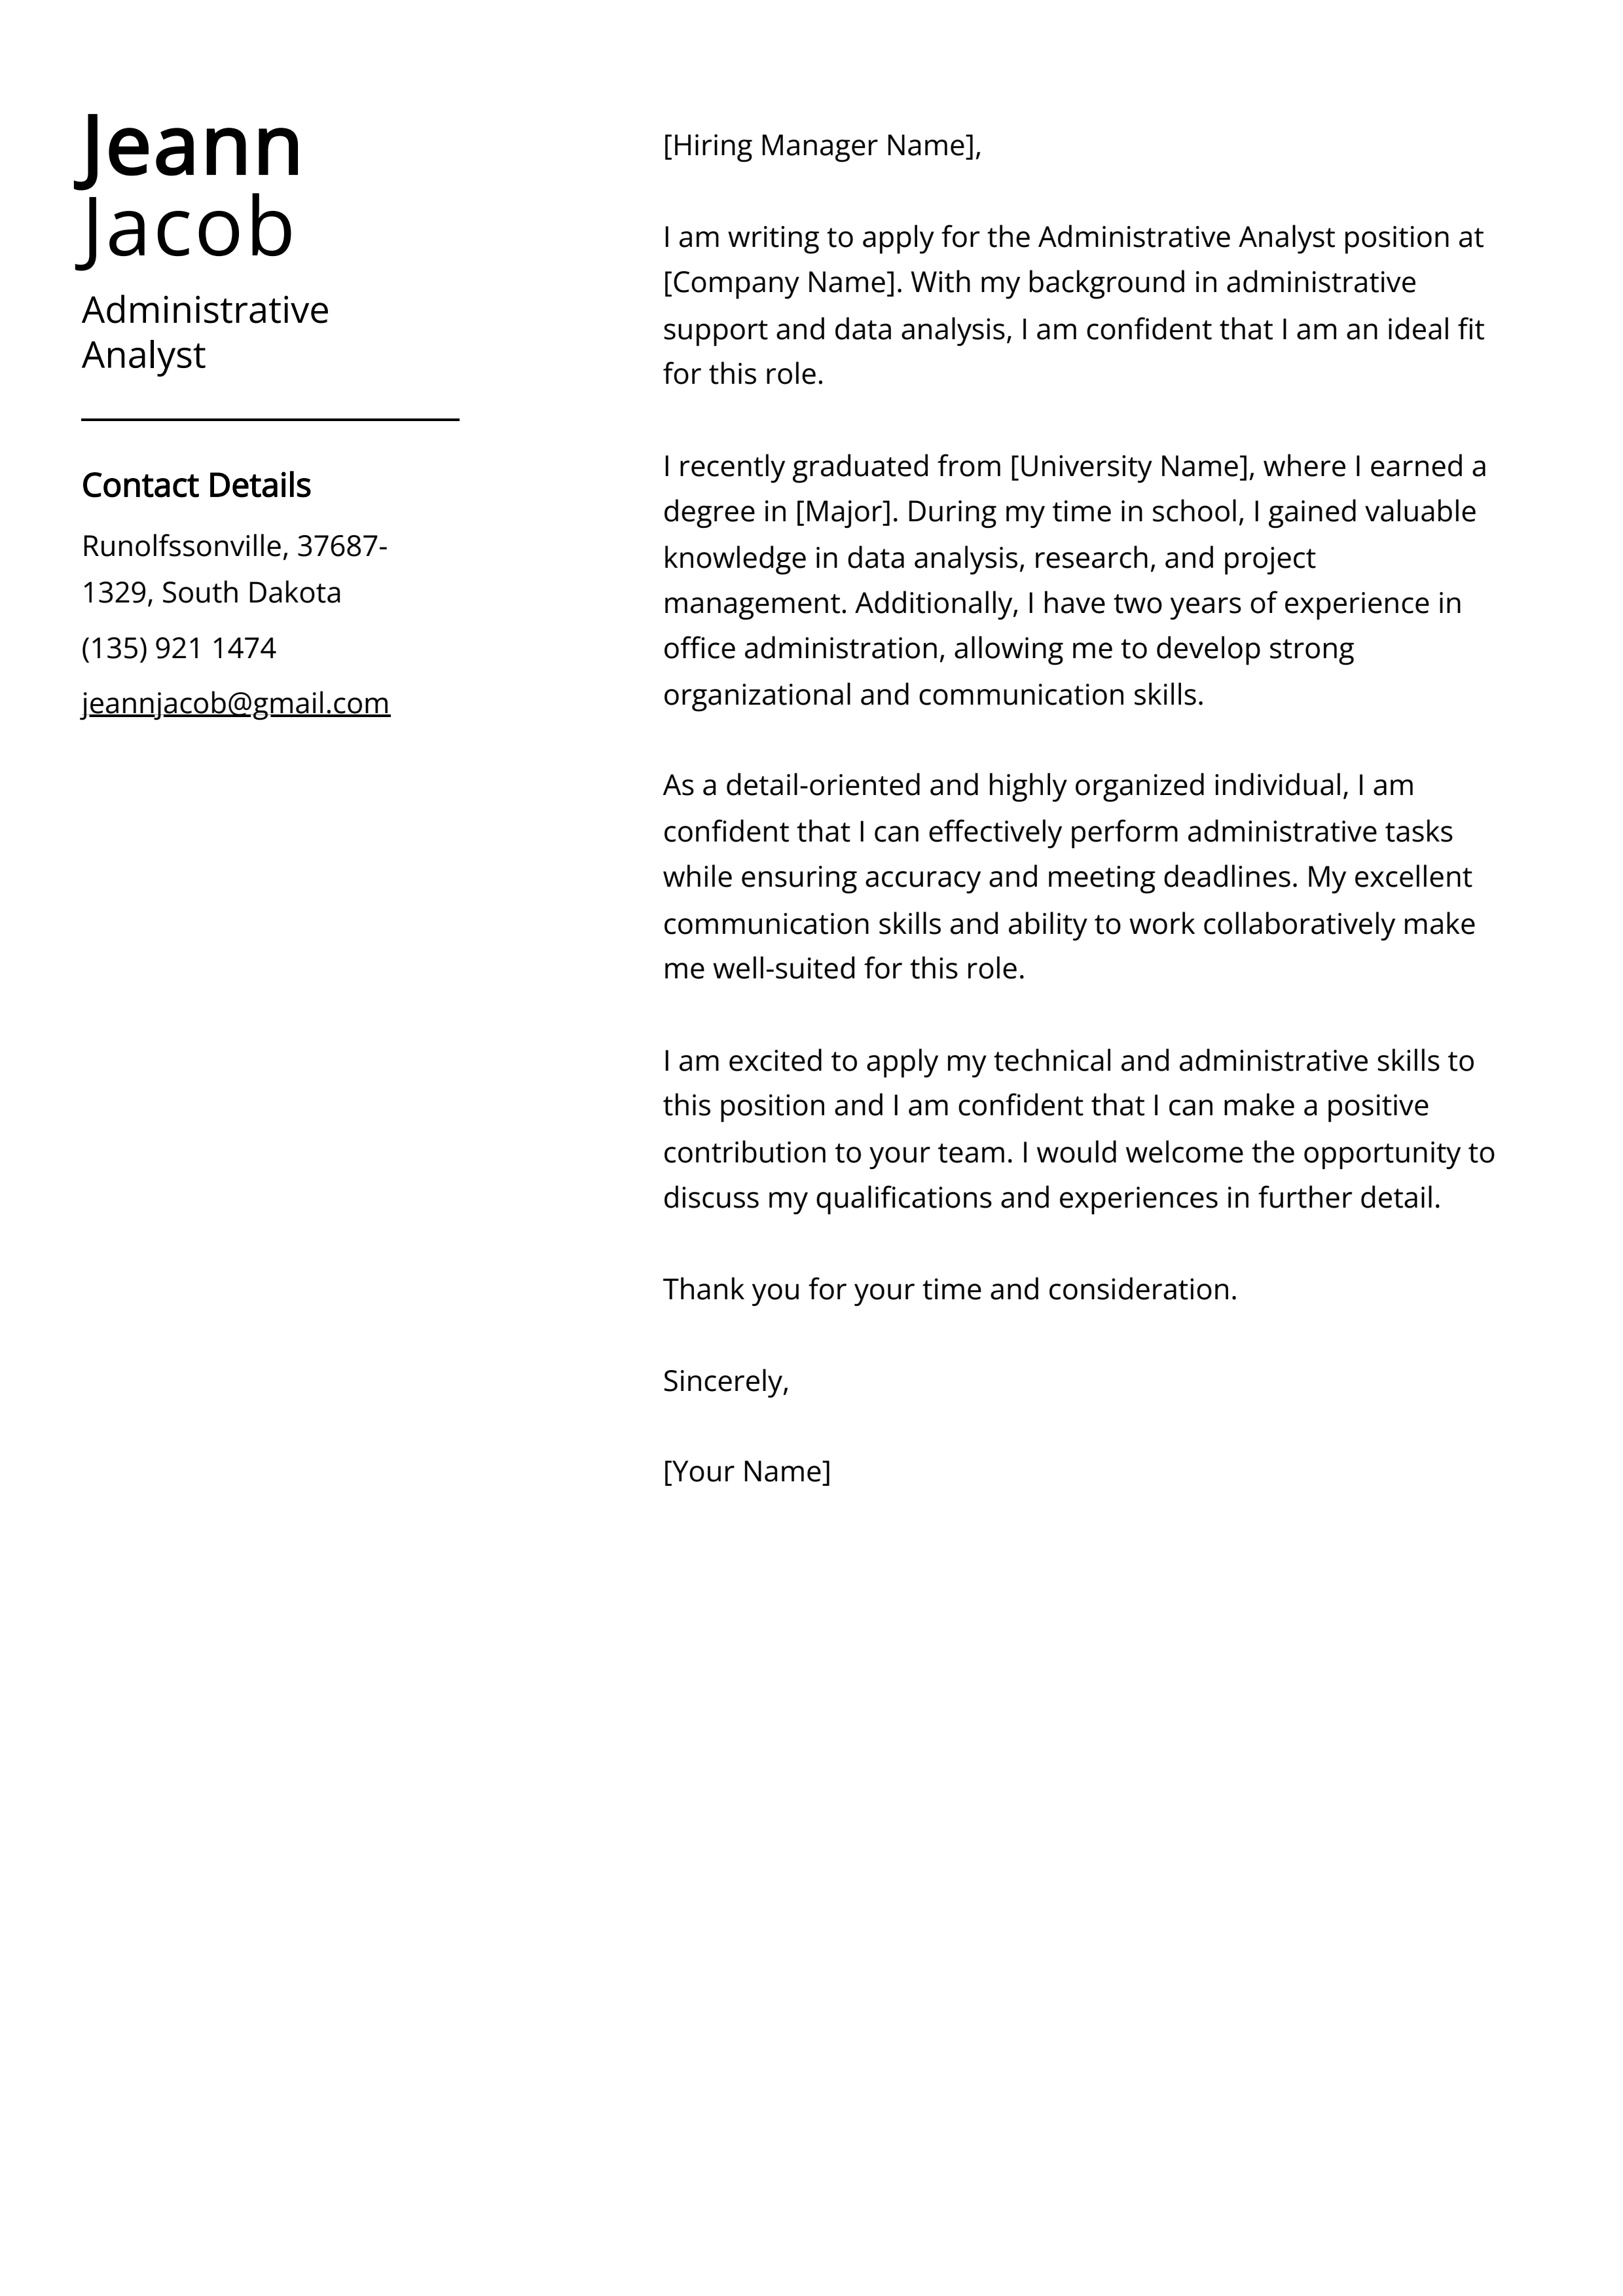 Administrative Analyst Cover Letter Example